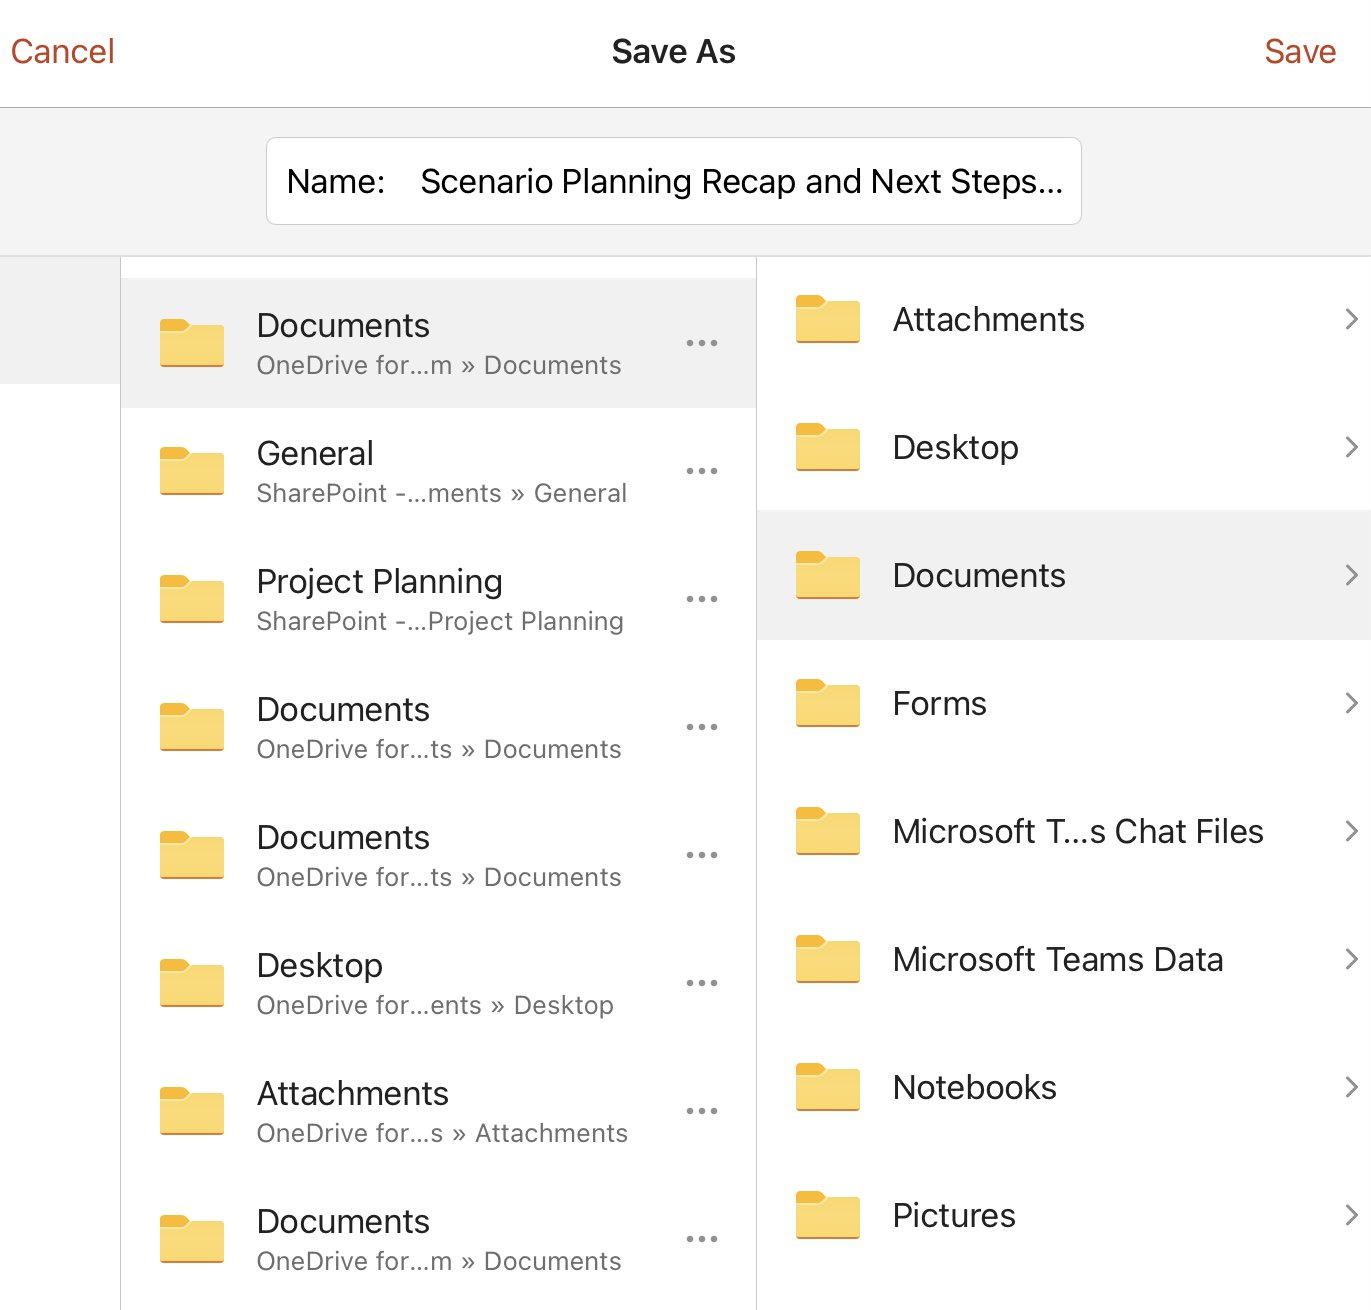 Screenshot of the save dialog showing many Documents folders